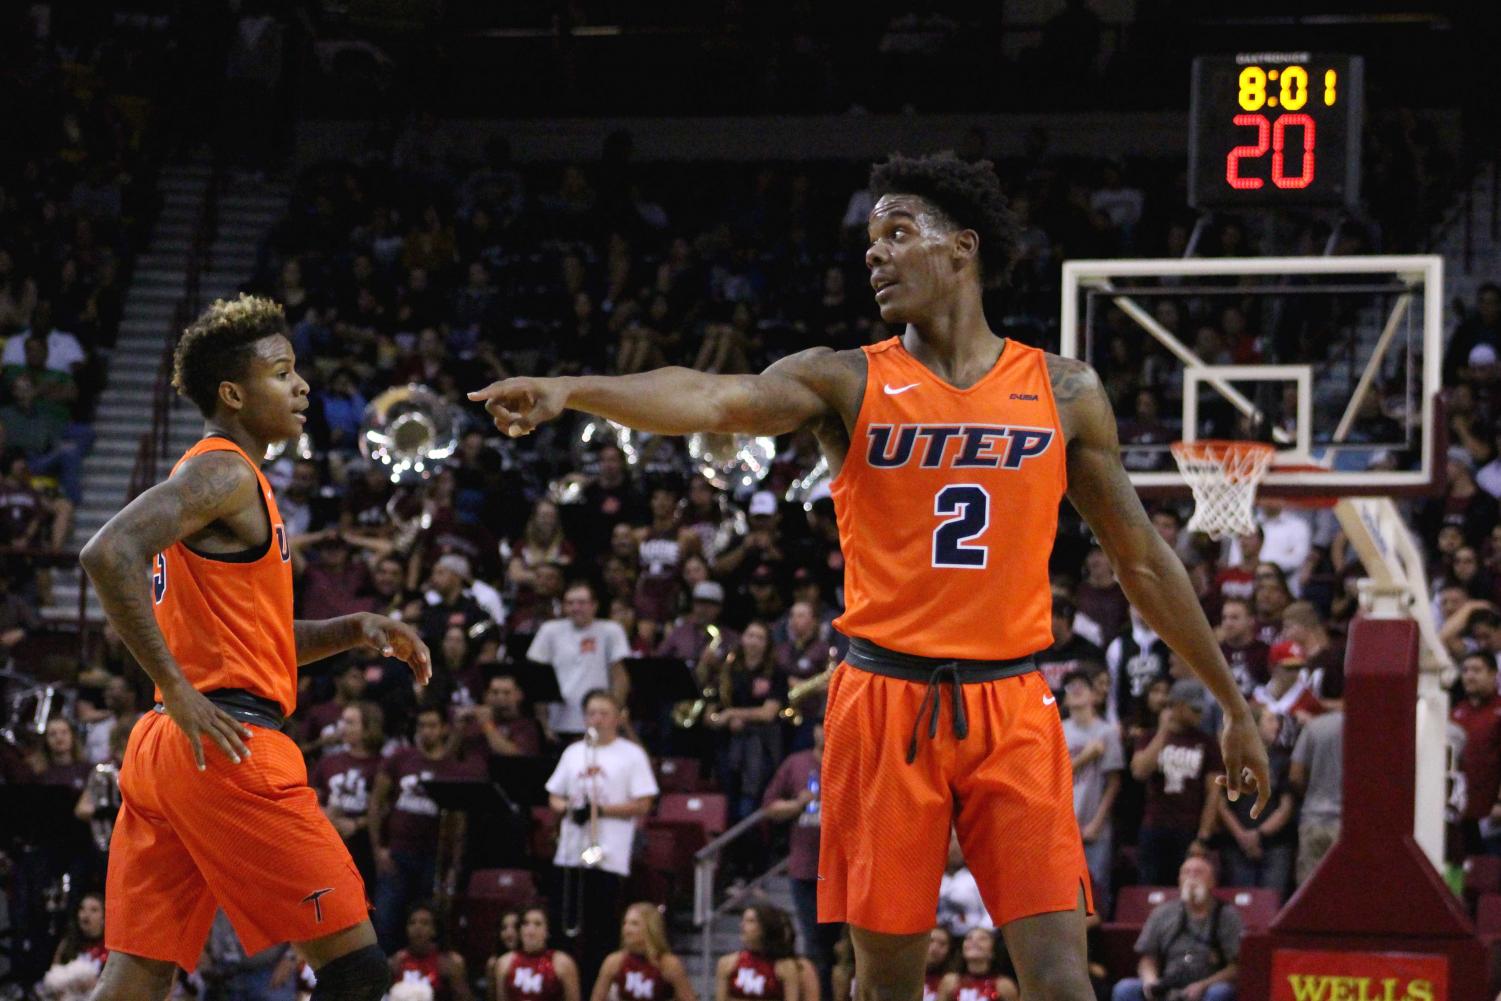 Miners+drop+fourth+straight+in+72-63+loss+to+NMSU